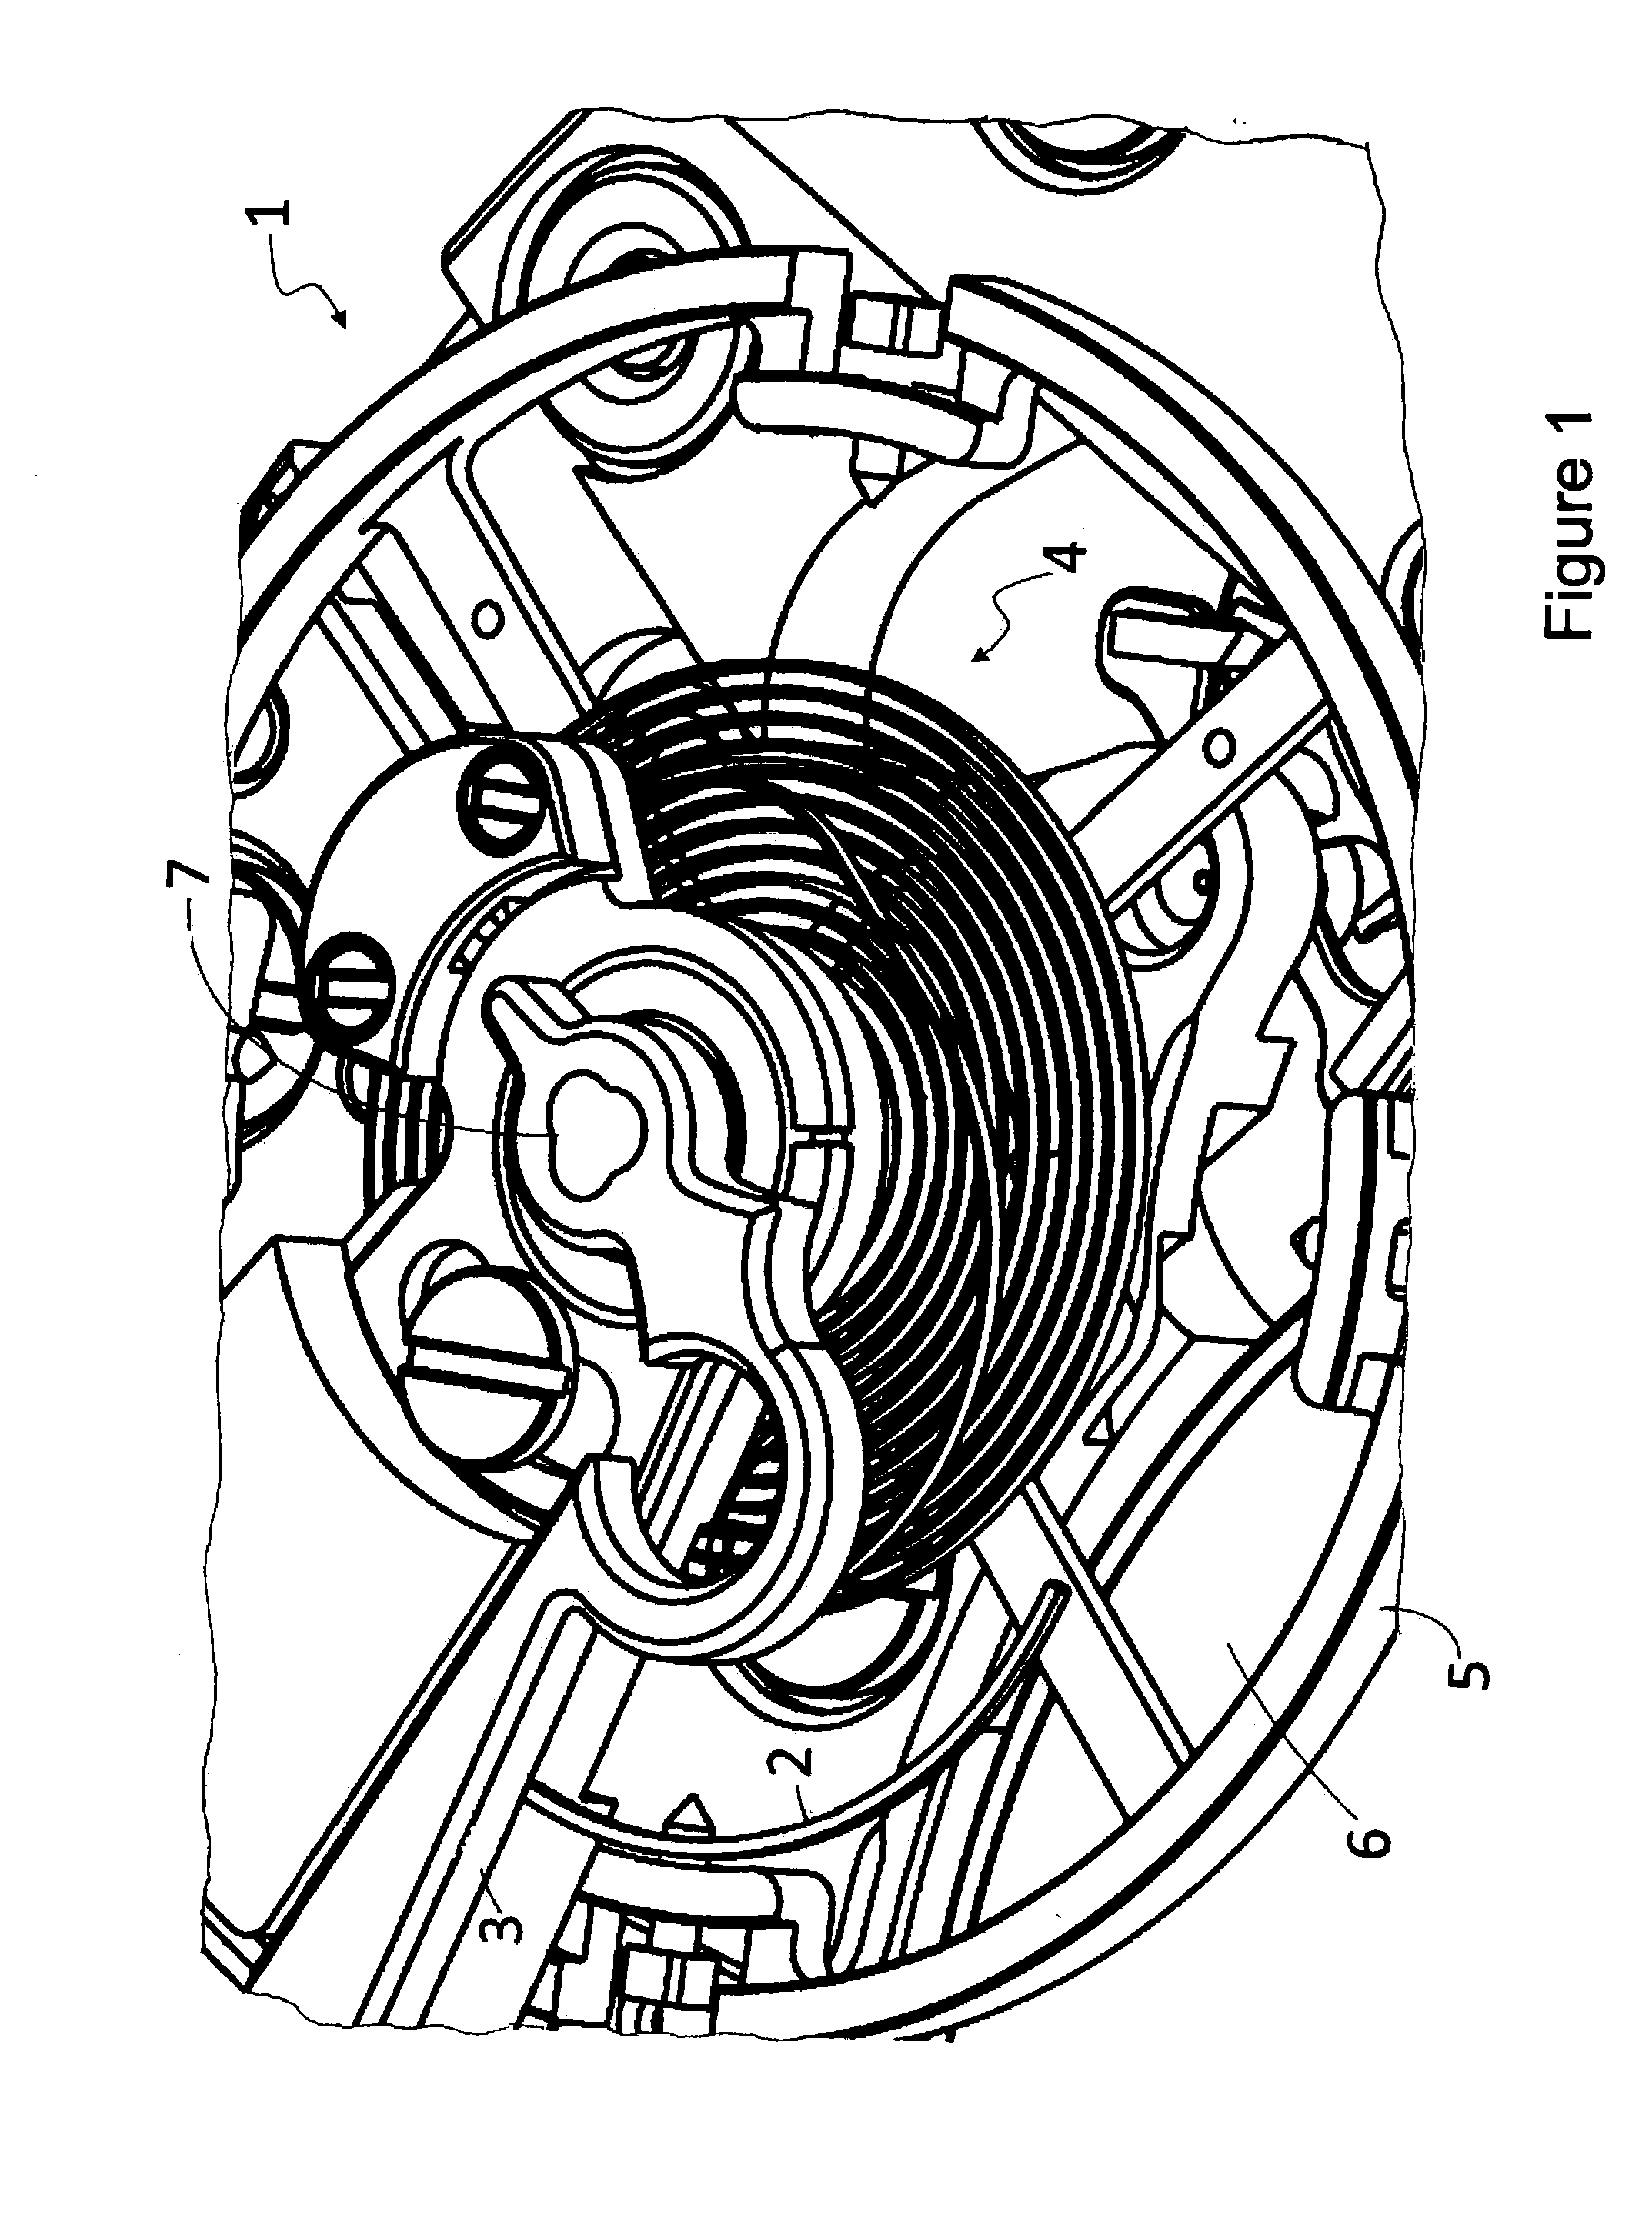 Method for checking the identity of a mechanical watch movement